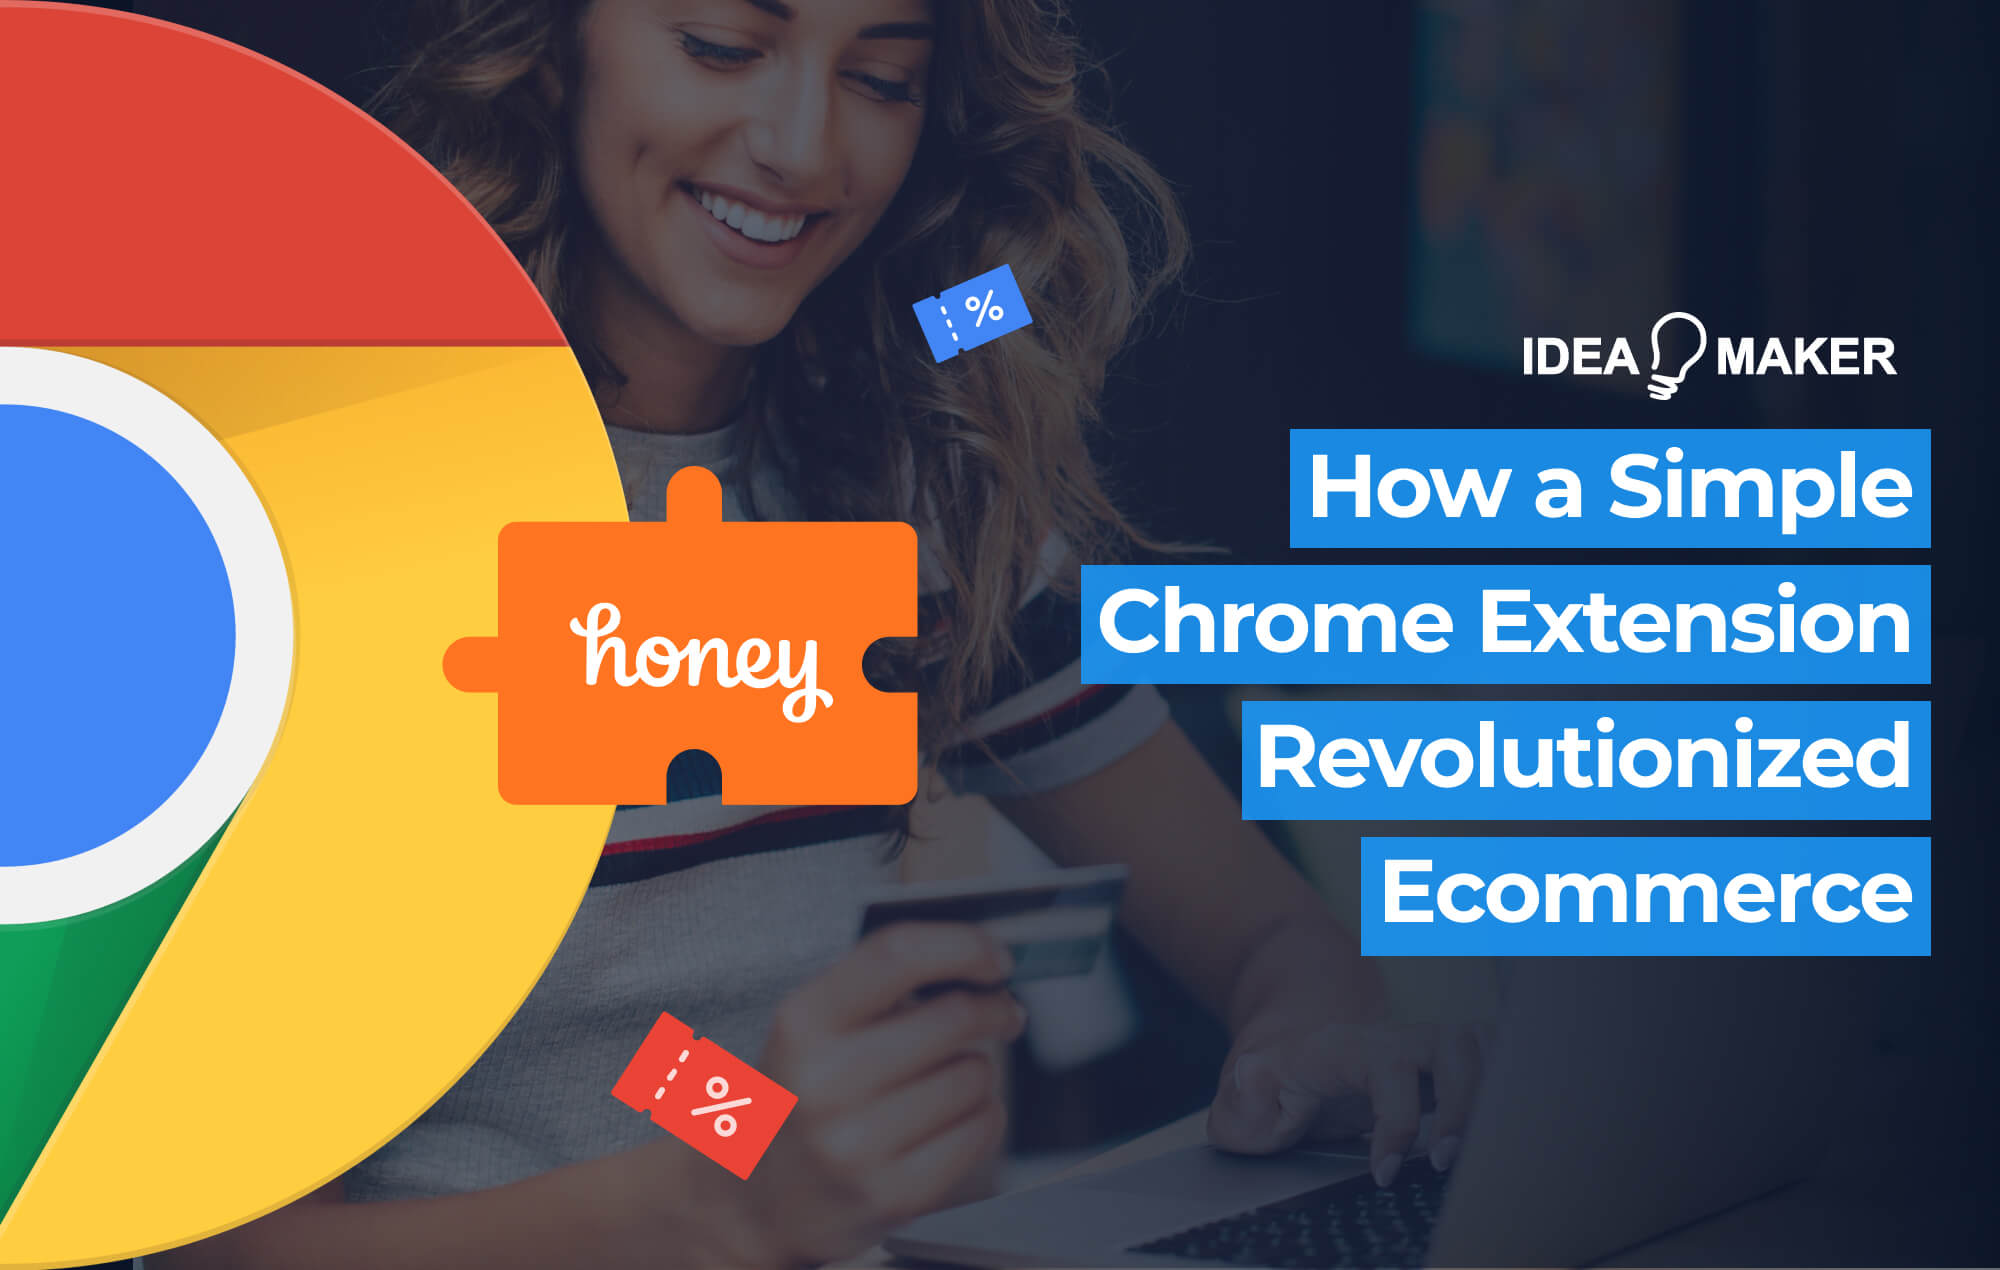 How a Simple Chrome Extension Revolutionized Ecommerce